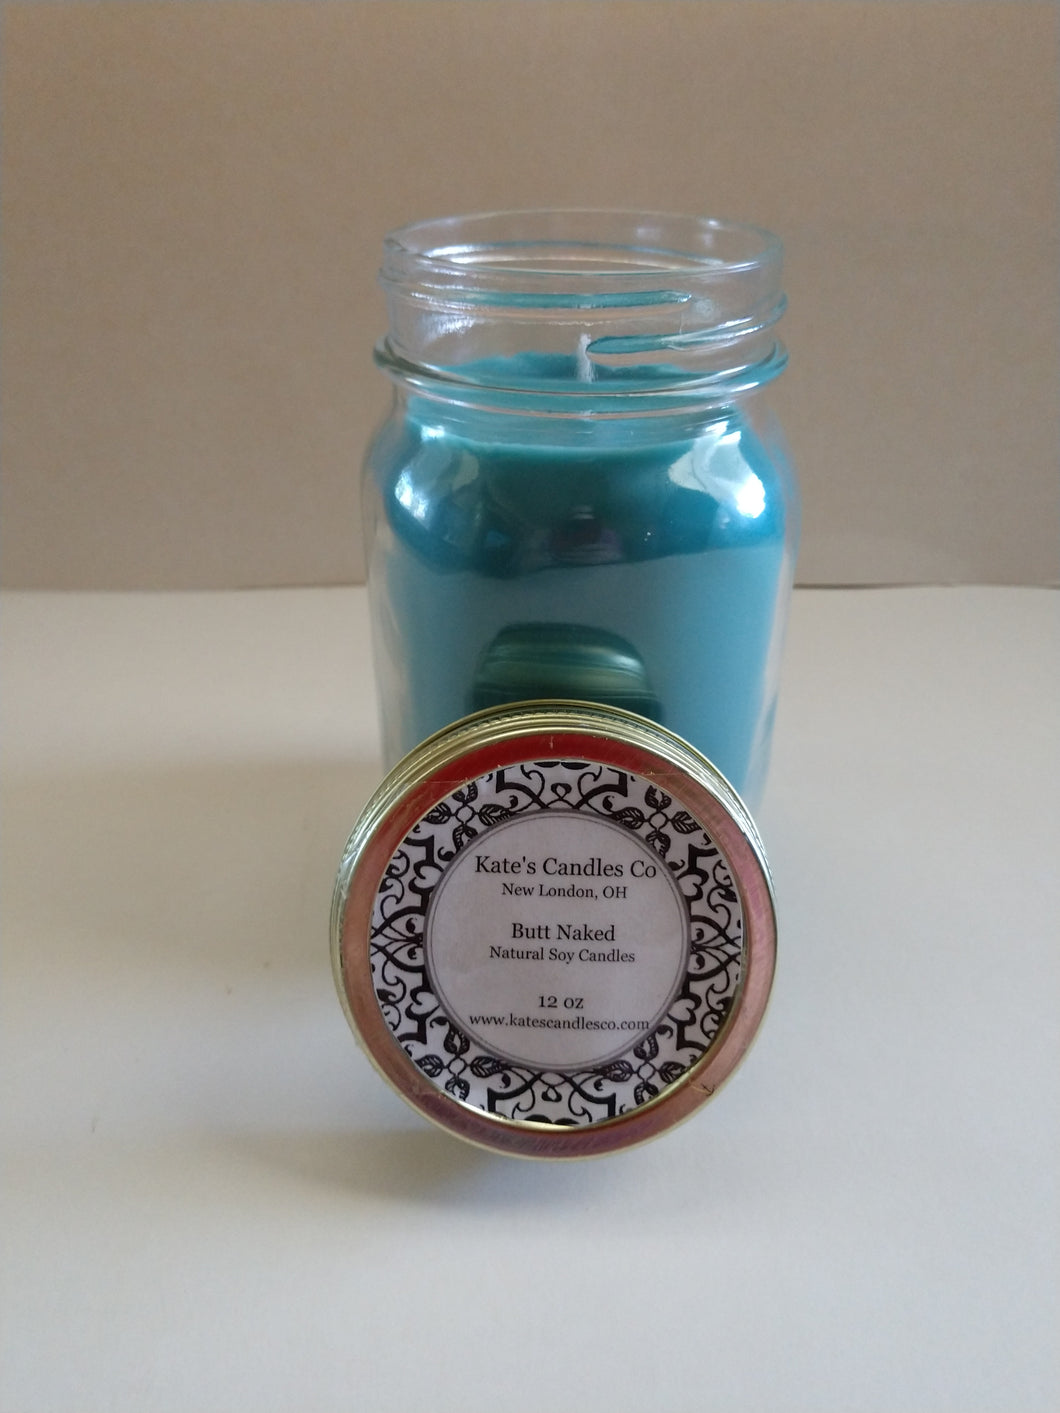 Butt Naked Scented Soy Candles - Kate's Candles Co. Soy Candles